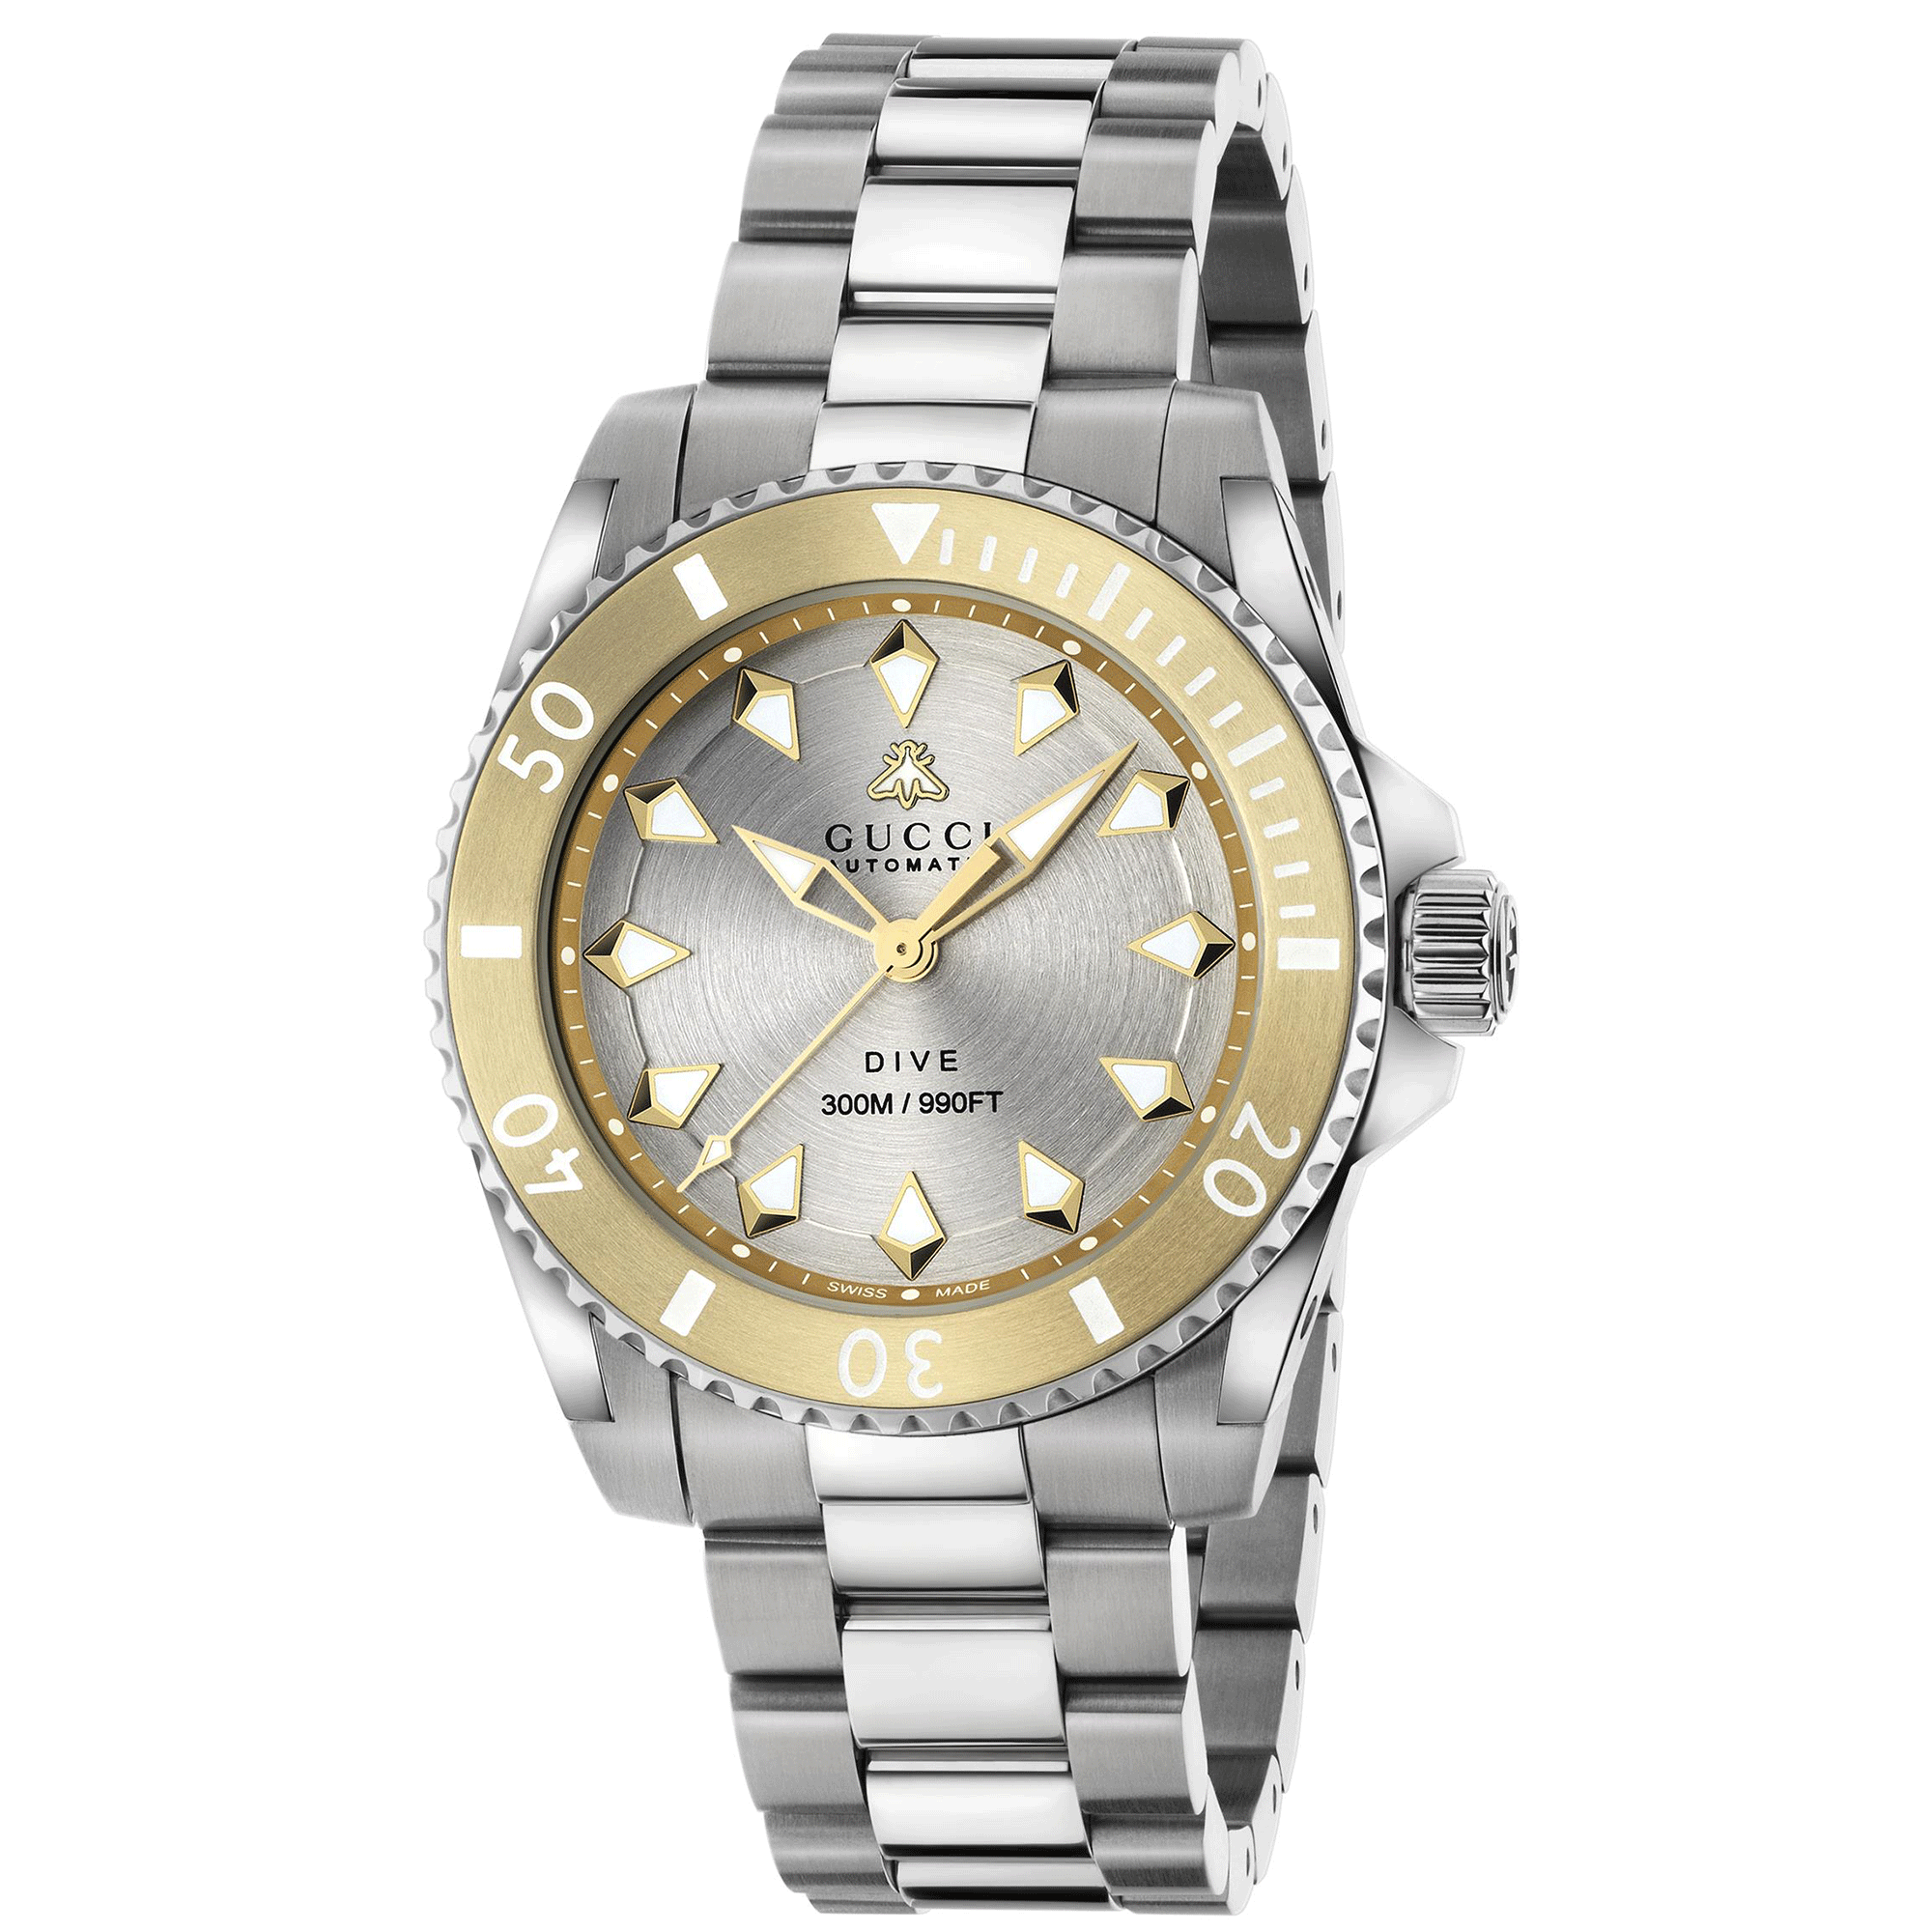 Gucci Dive 40mm Stainless Steel Automatic Watch With A Silver Dial & Gold Bezel